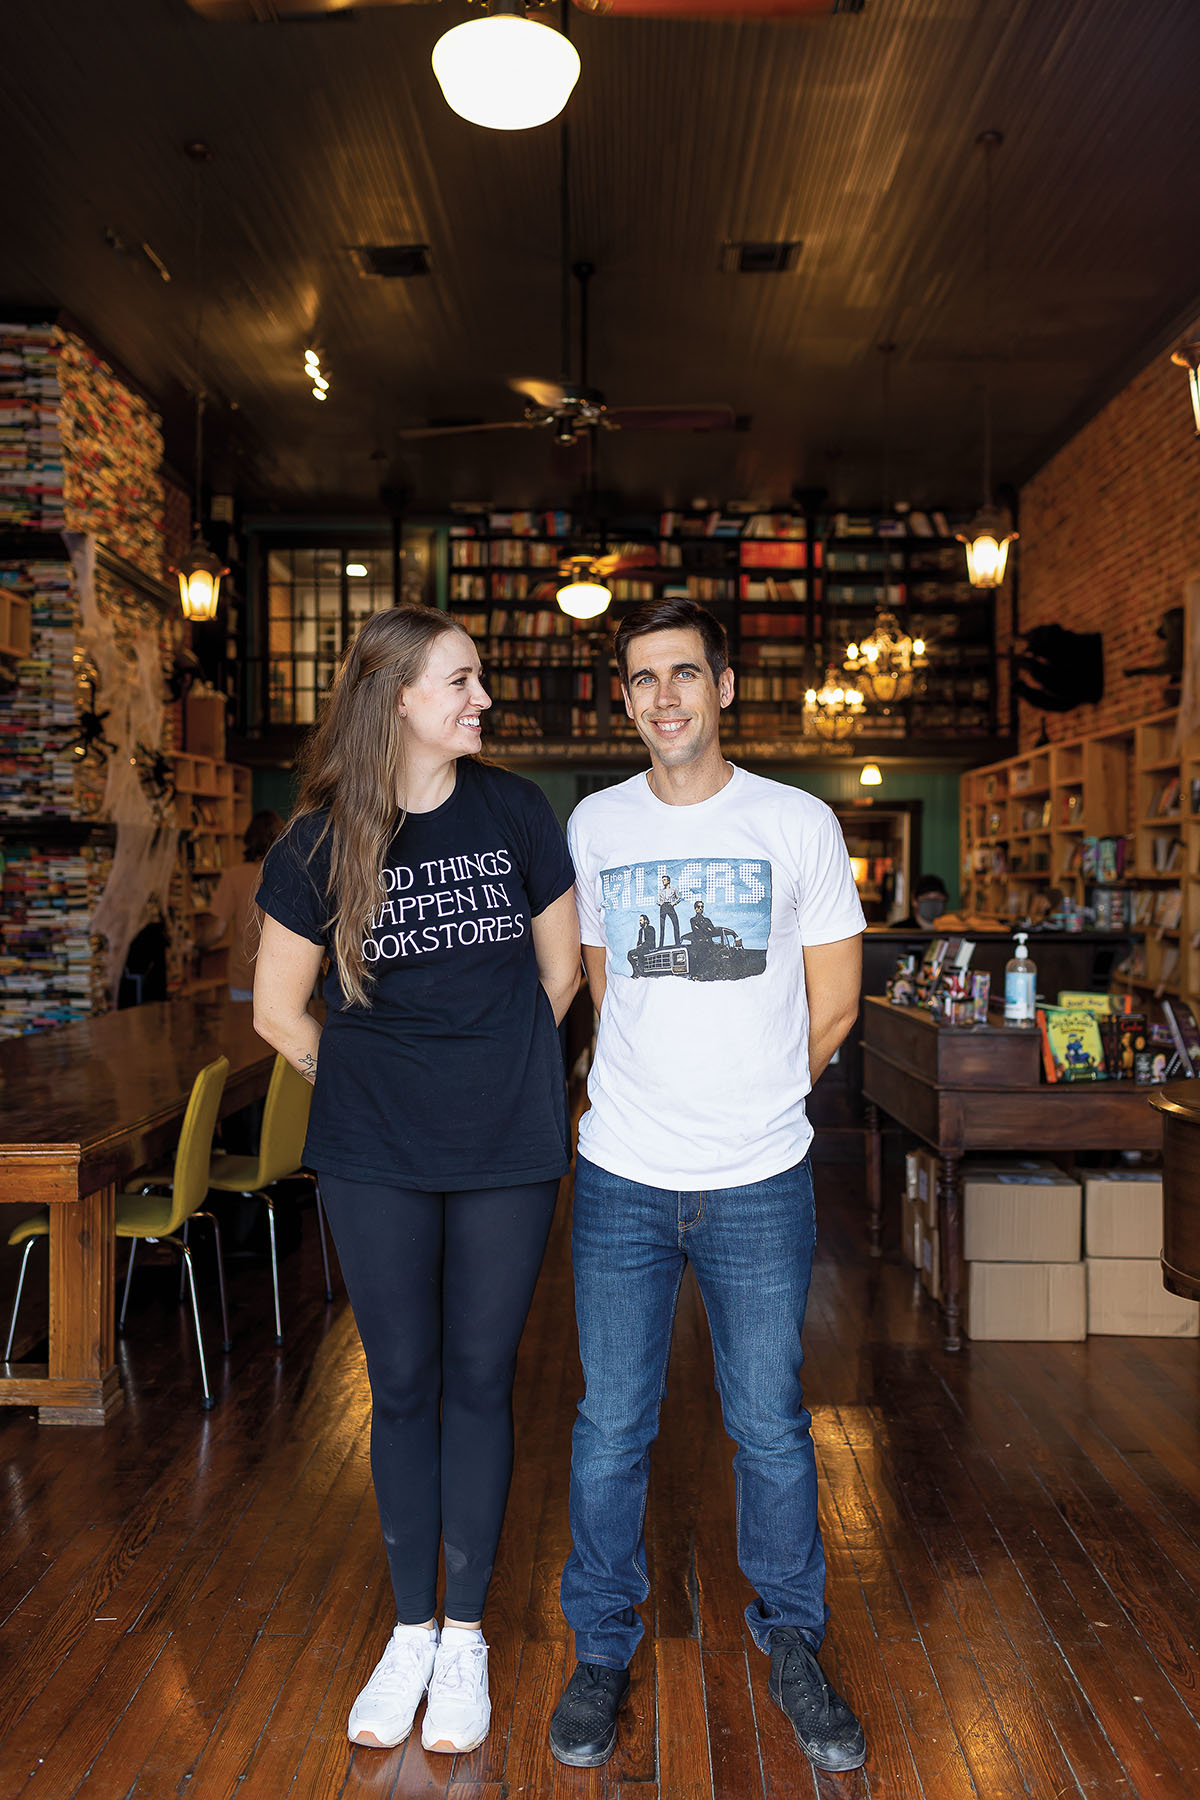 A woman and man, dressed in t-shirts and jeans, stand inside of a warm, wood, richly decorated room with books on shelves and a light overhead